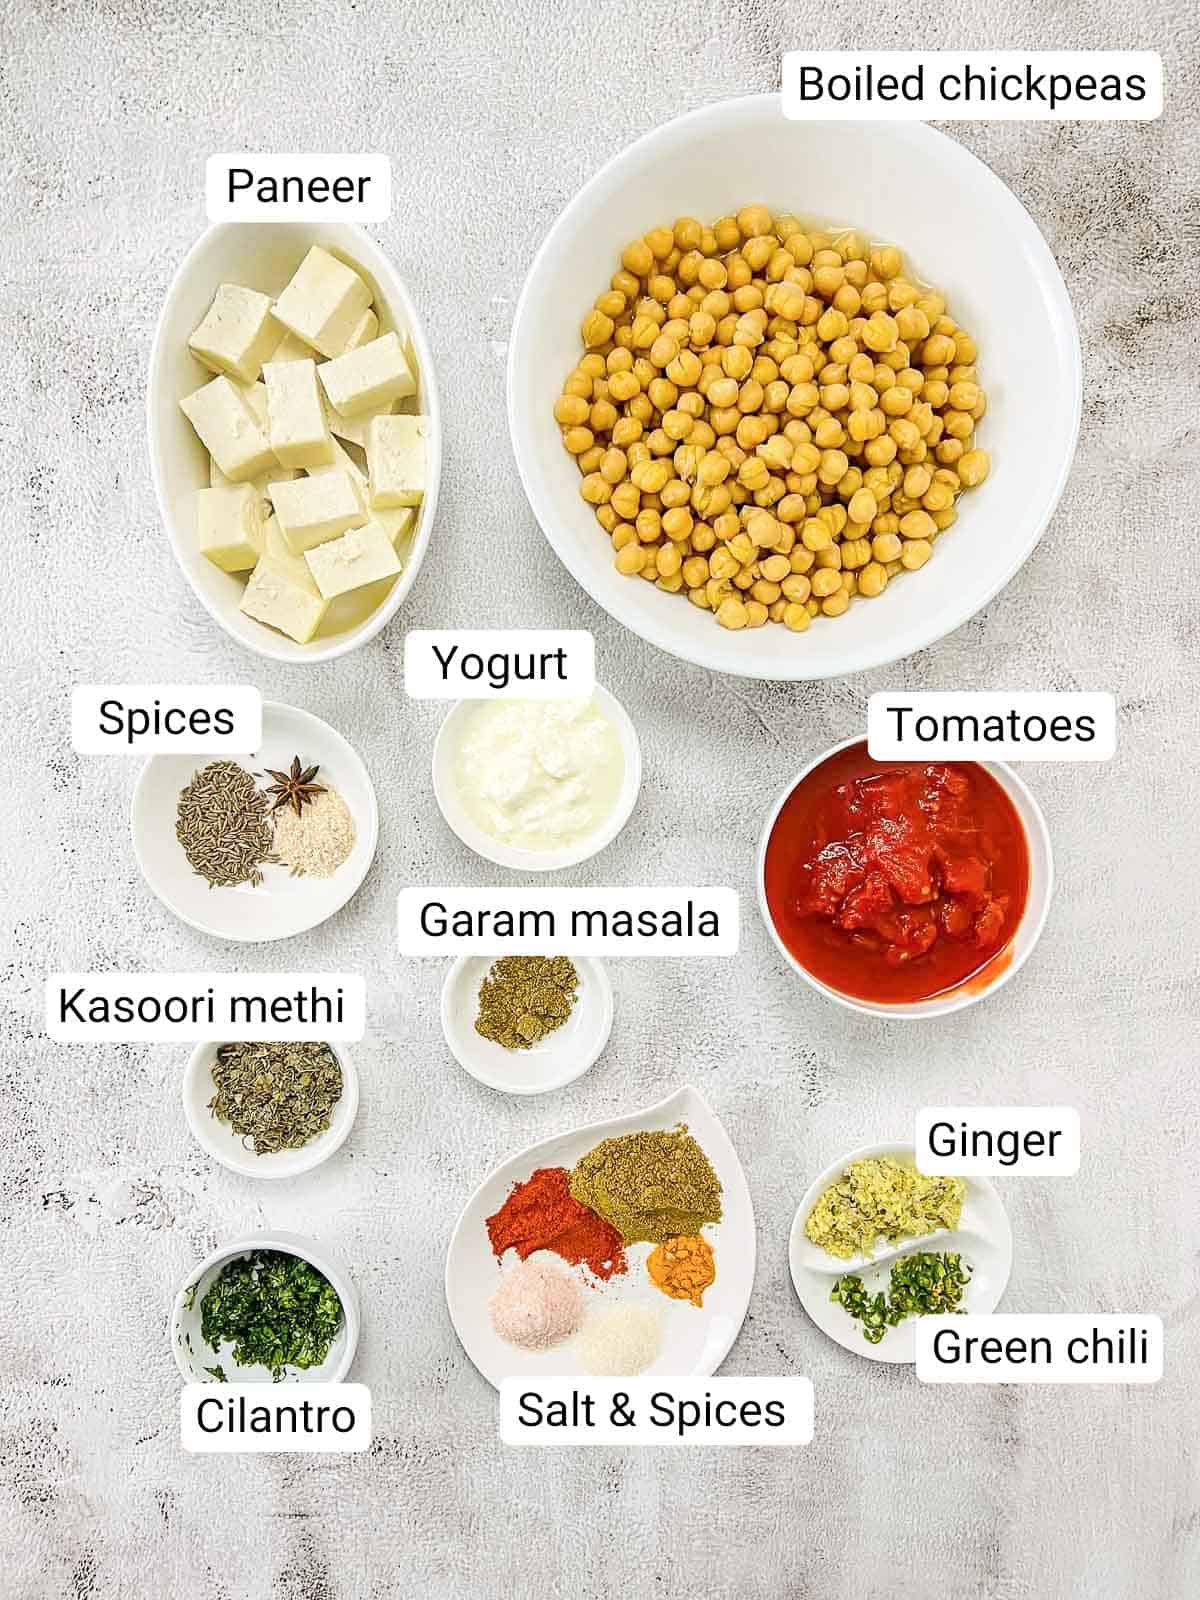 Ingredients to make chana paneer placed on a white surface.